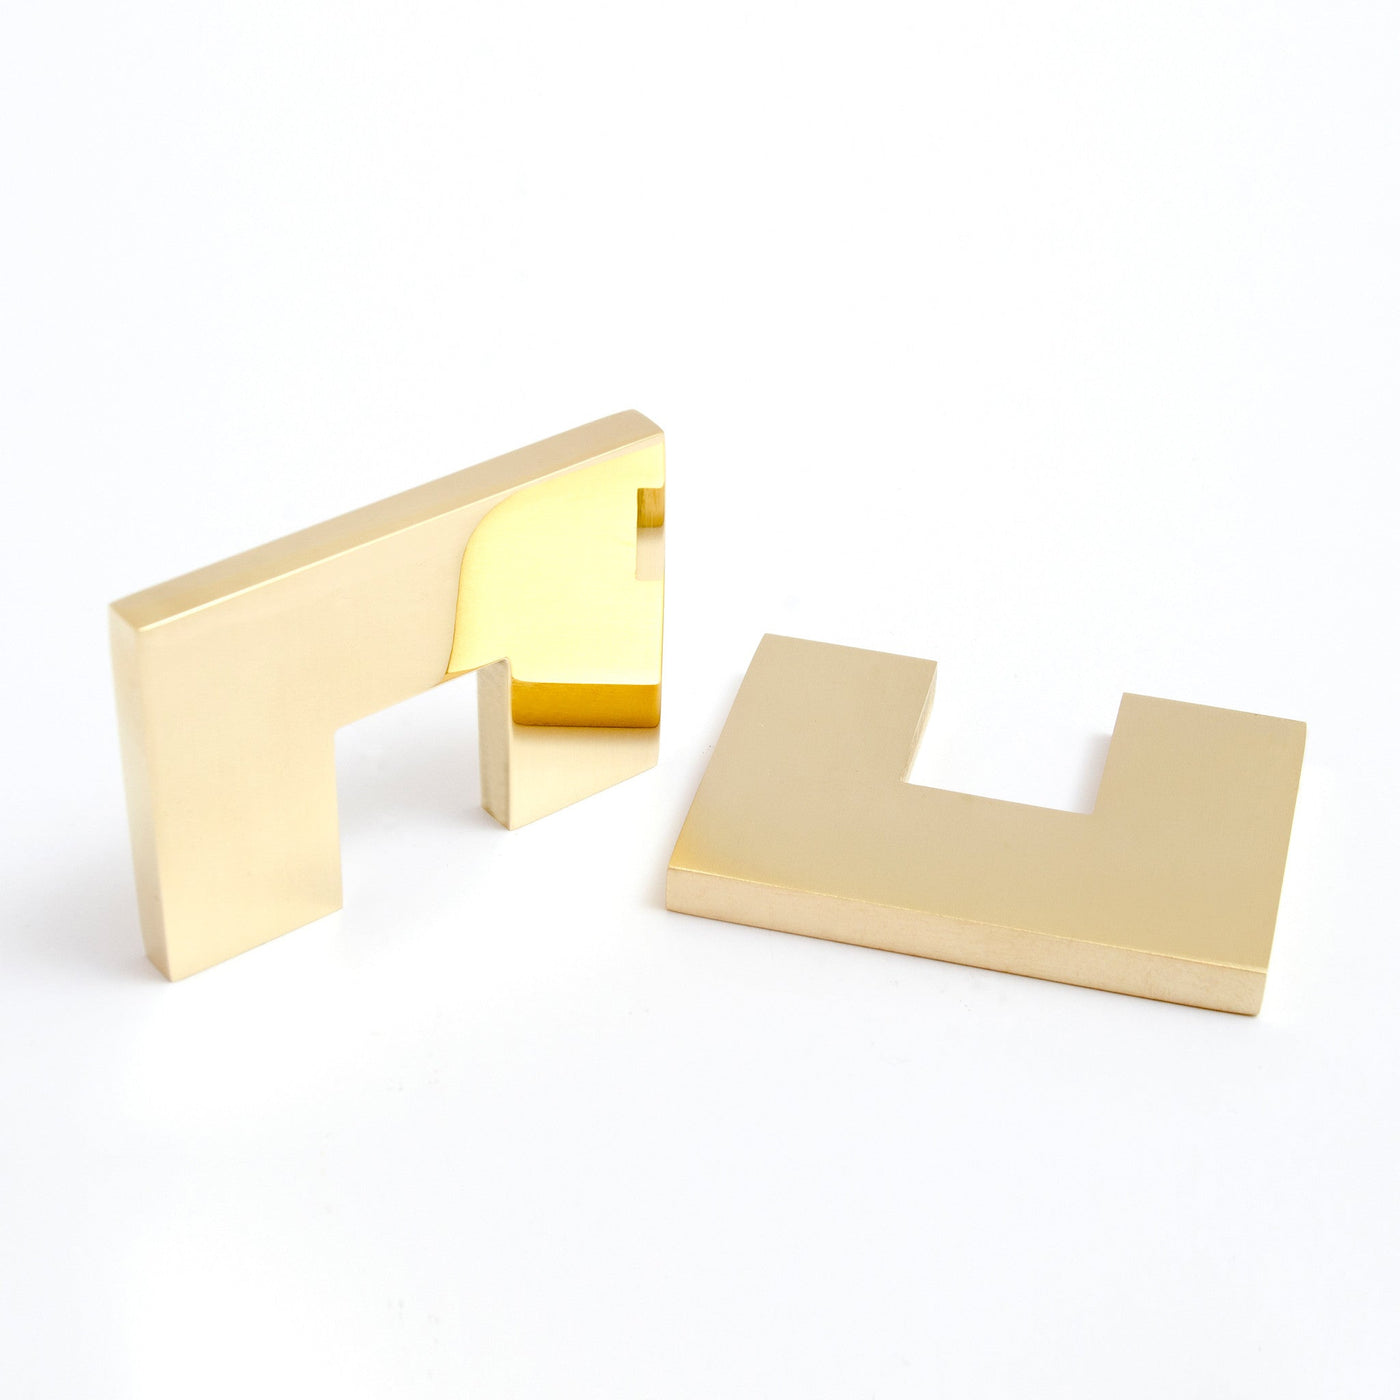 Little brushed brass handles from the Clean Cut Series. Perfect accents in kitchens and other millwork designs.